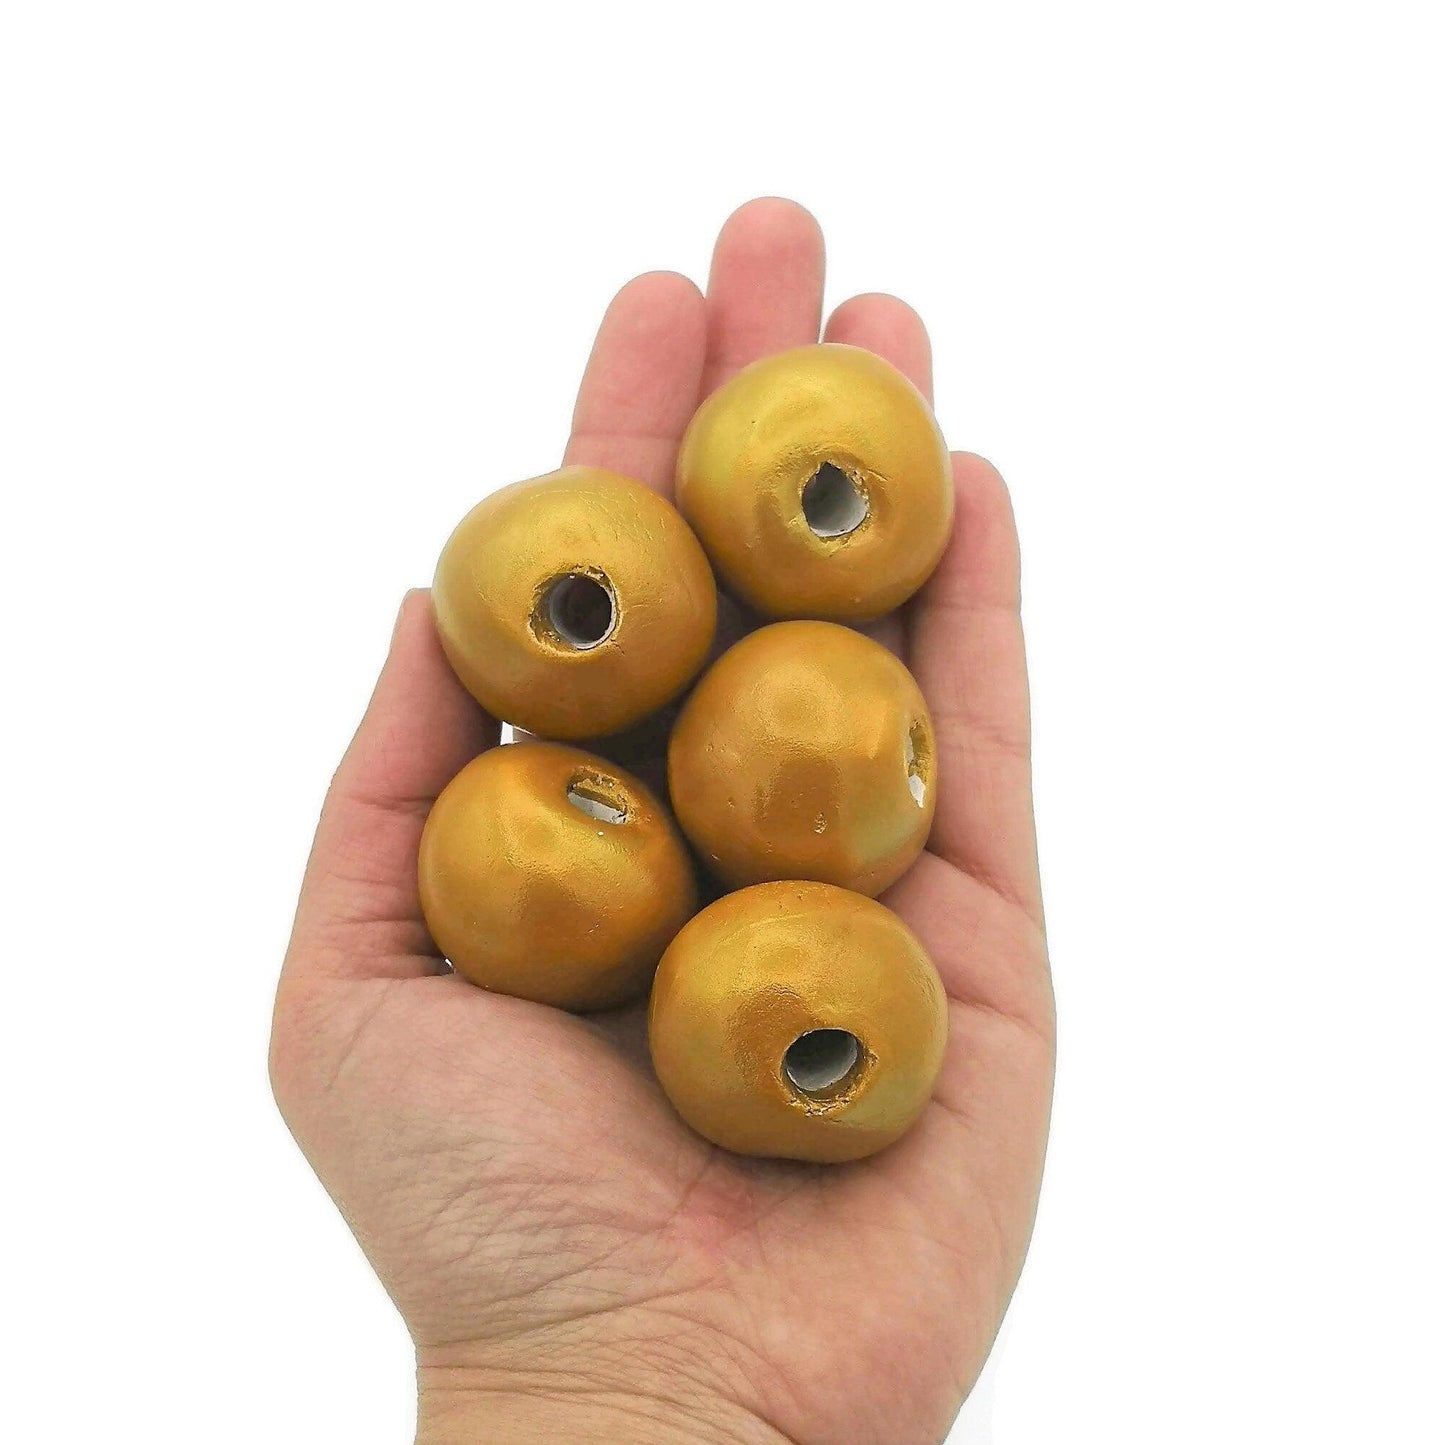 3pc 25mm Handmade Ceramic Beads for Jewelry Making, Matte Beads for Crafts,  Decorating, Macrame Beads Large Hole, Unique Mixed Clay Beads 